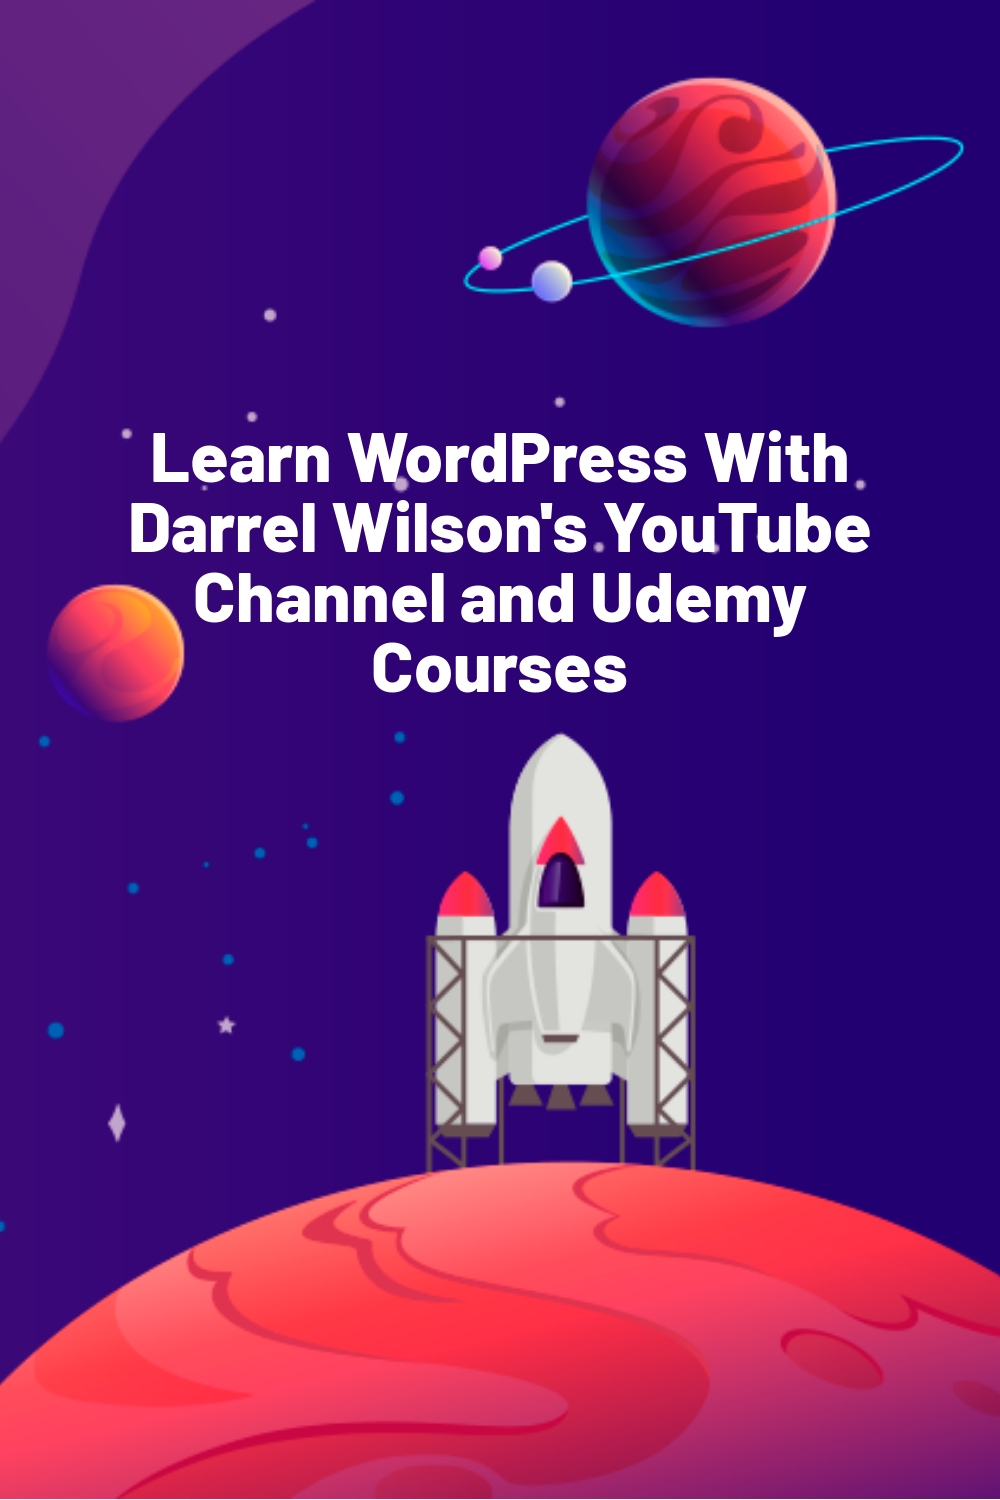 Learn WordPress With Darrel Wilson’s YouTube Channel and Udemy Courses